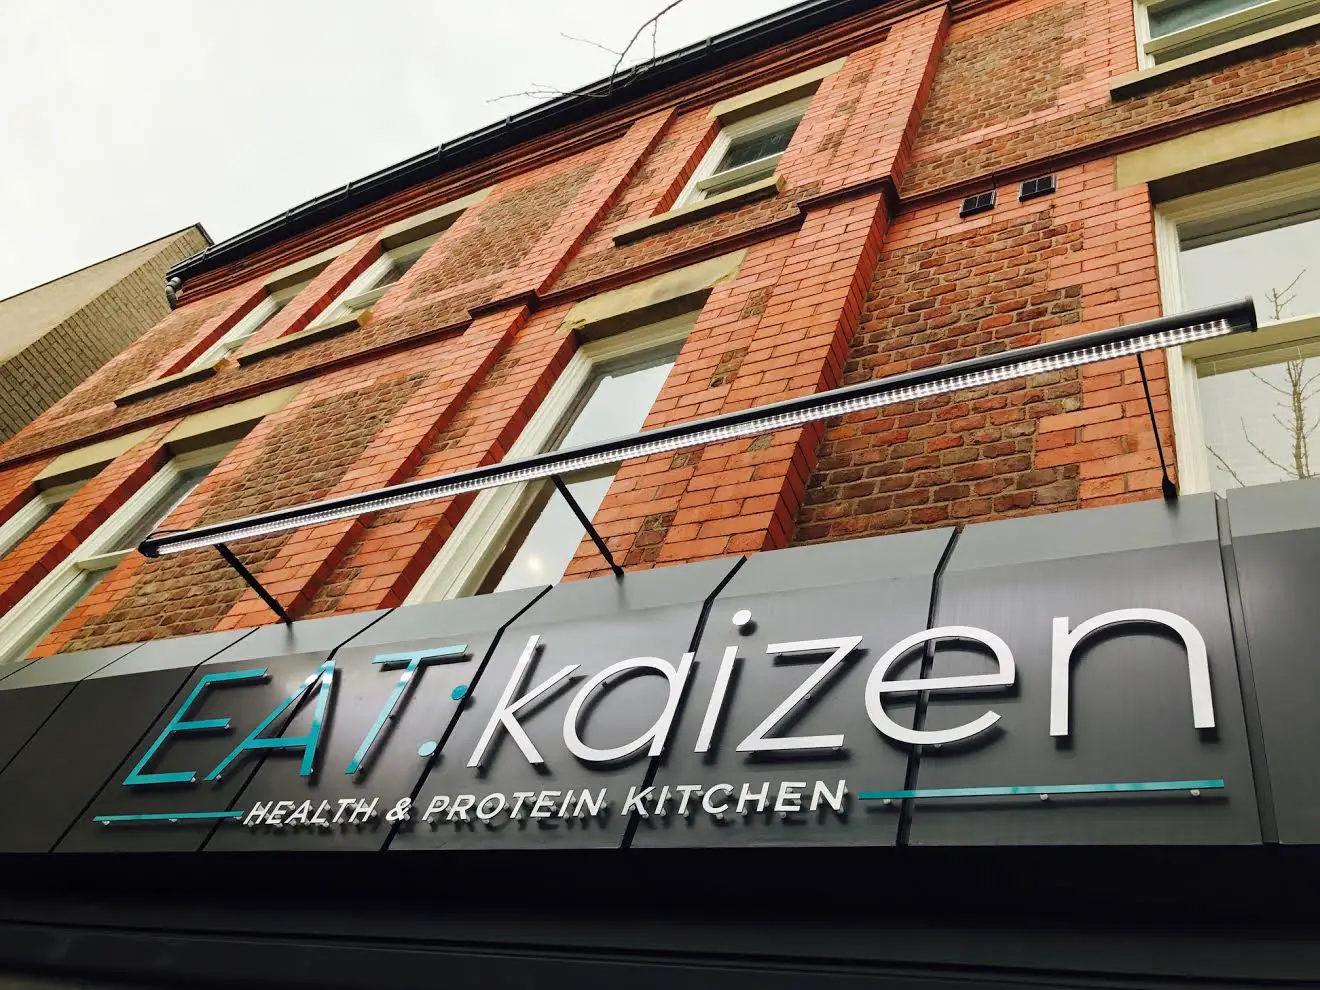 EAT:kaizen is the latest restaurant to open in Altrincham town centre